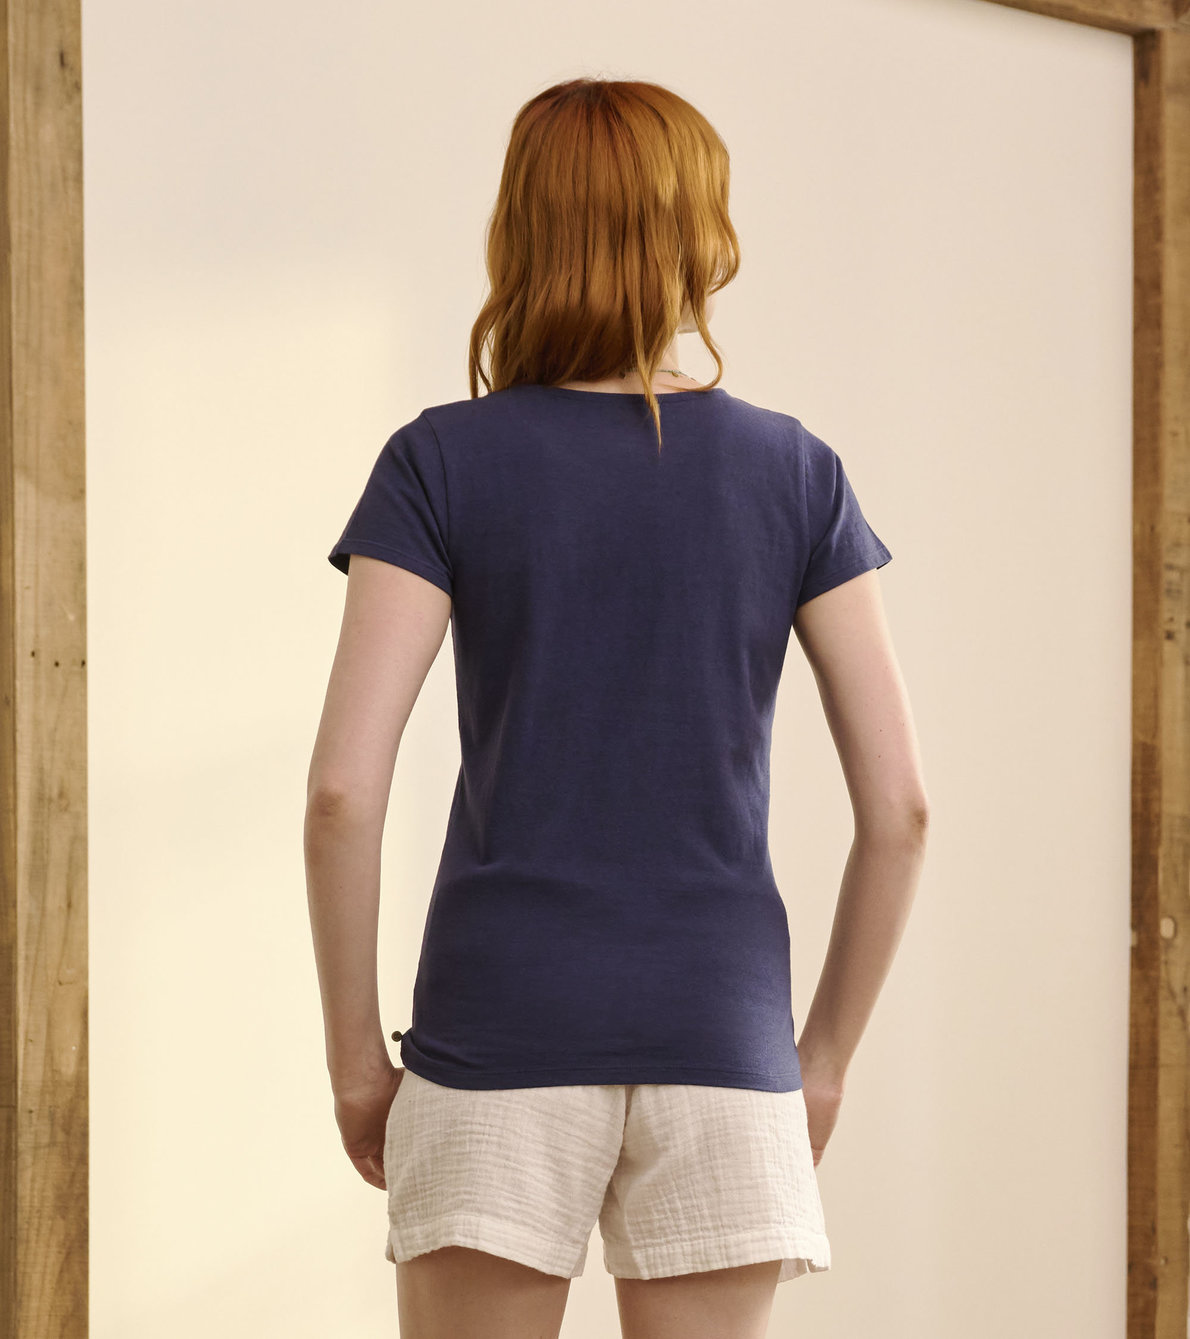 View larger image of Braided Neck Tee - Navy